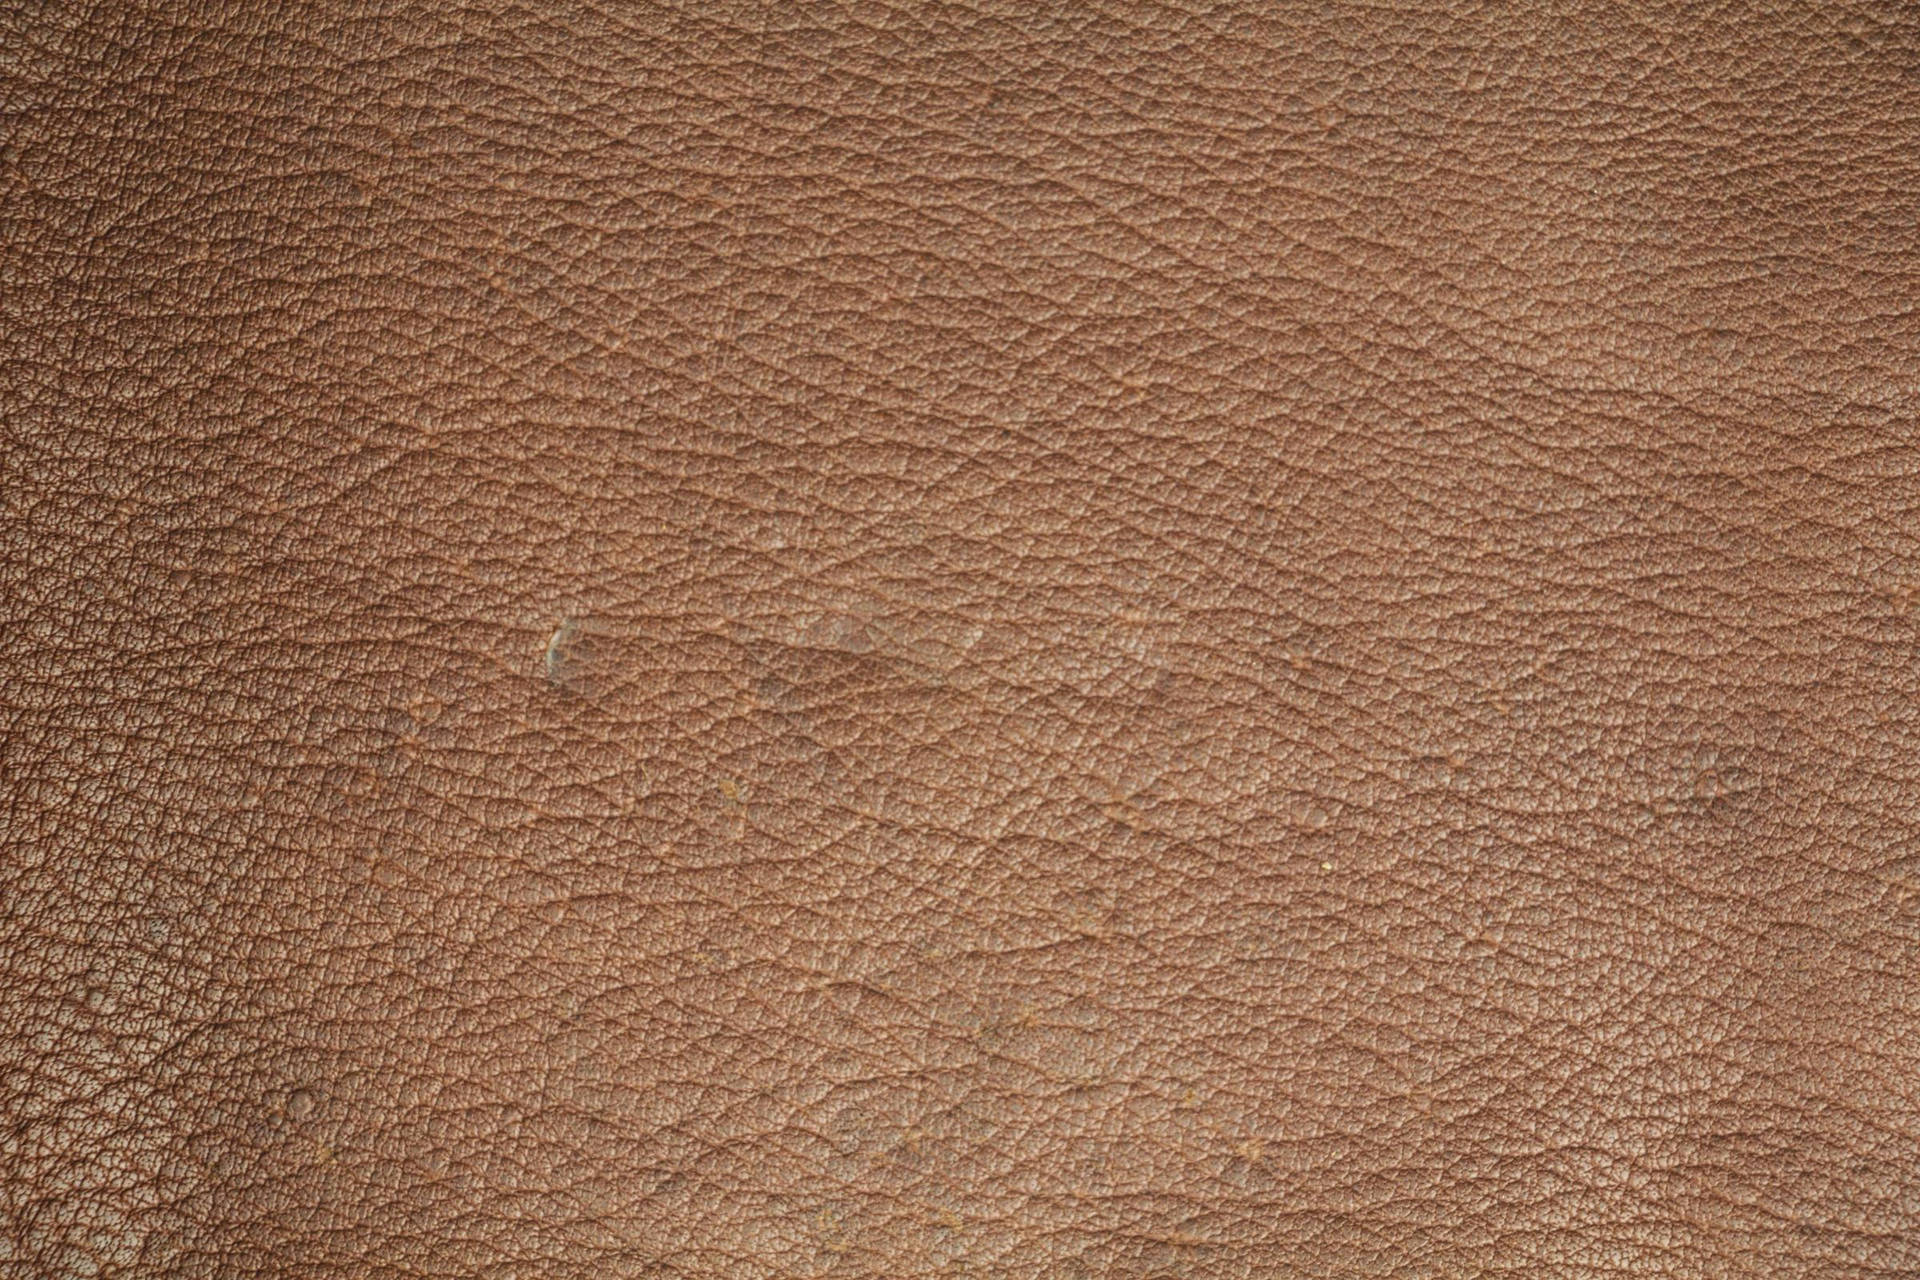 Minimalist Light Brown Leather Texture Book Cover Background